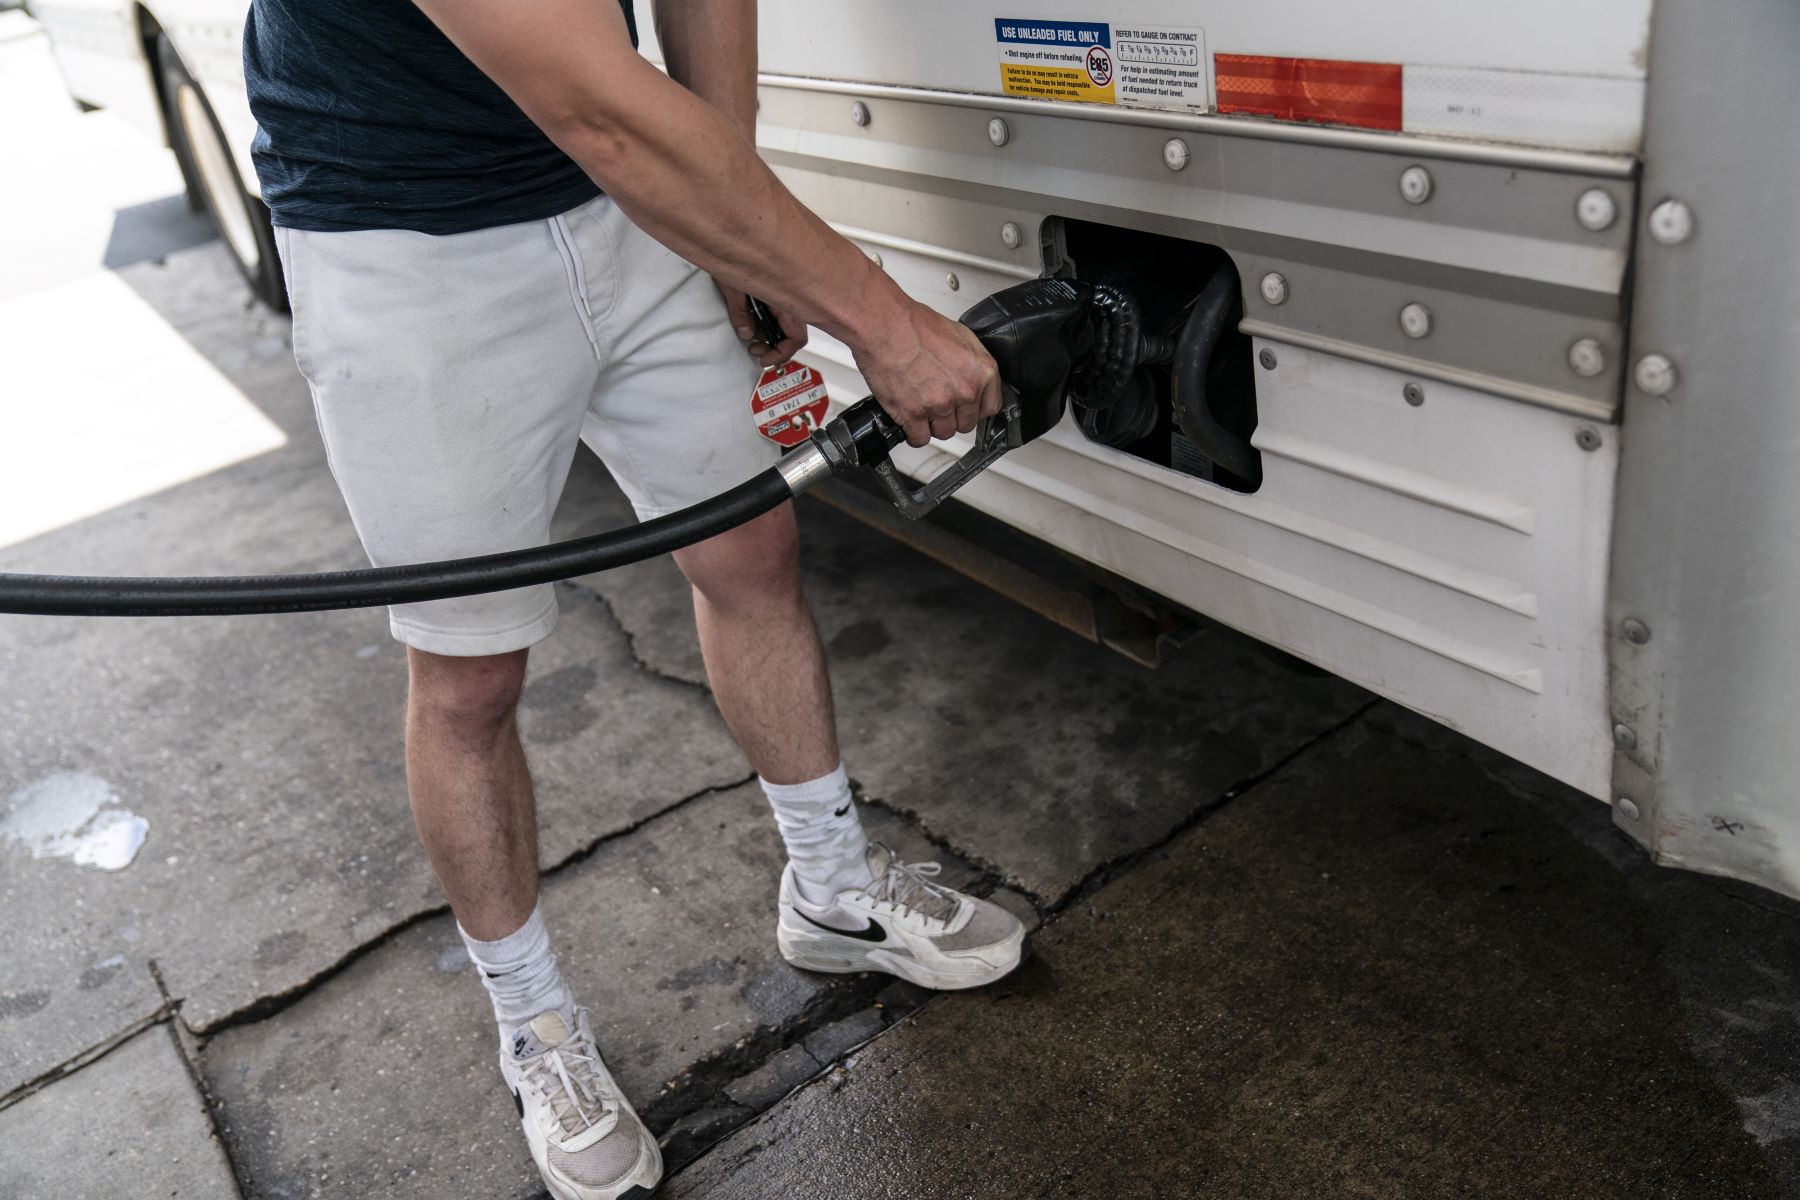 Filling up a U-Haul truck with gas at a Wawa fuel station in Annapolis, Maryland